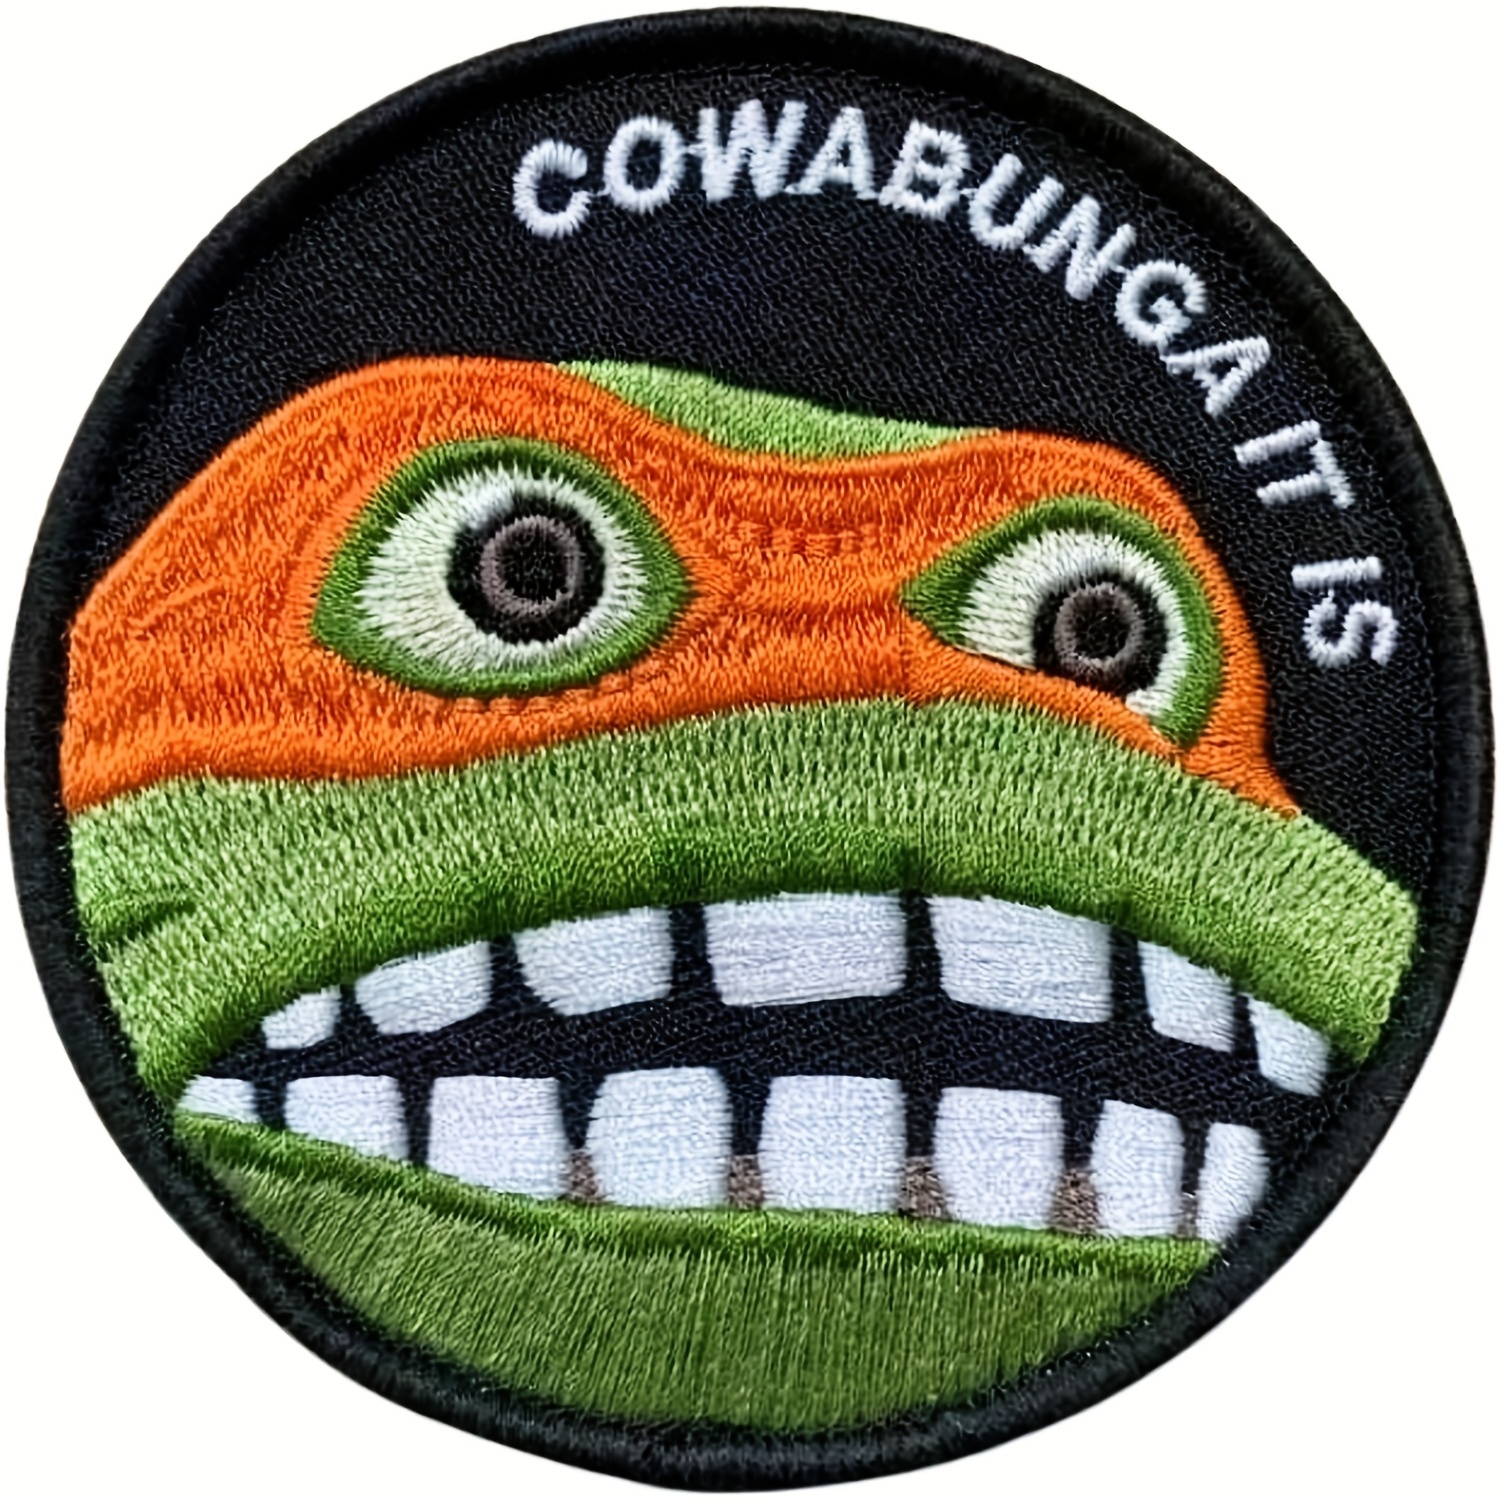 Funny Patches  Shop Funny Iron on Patches 